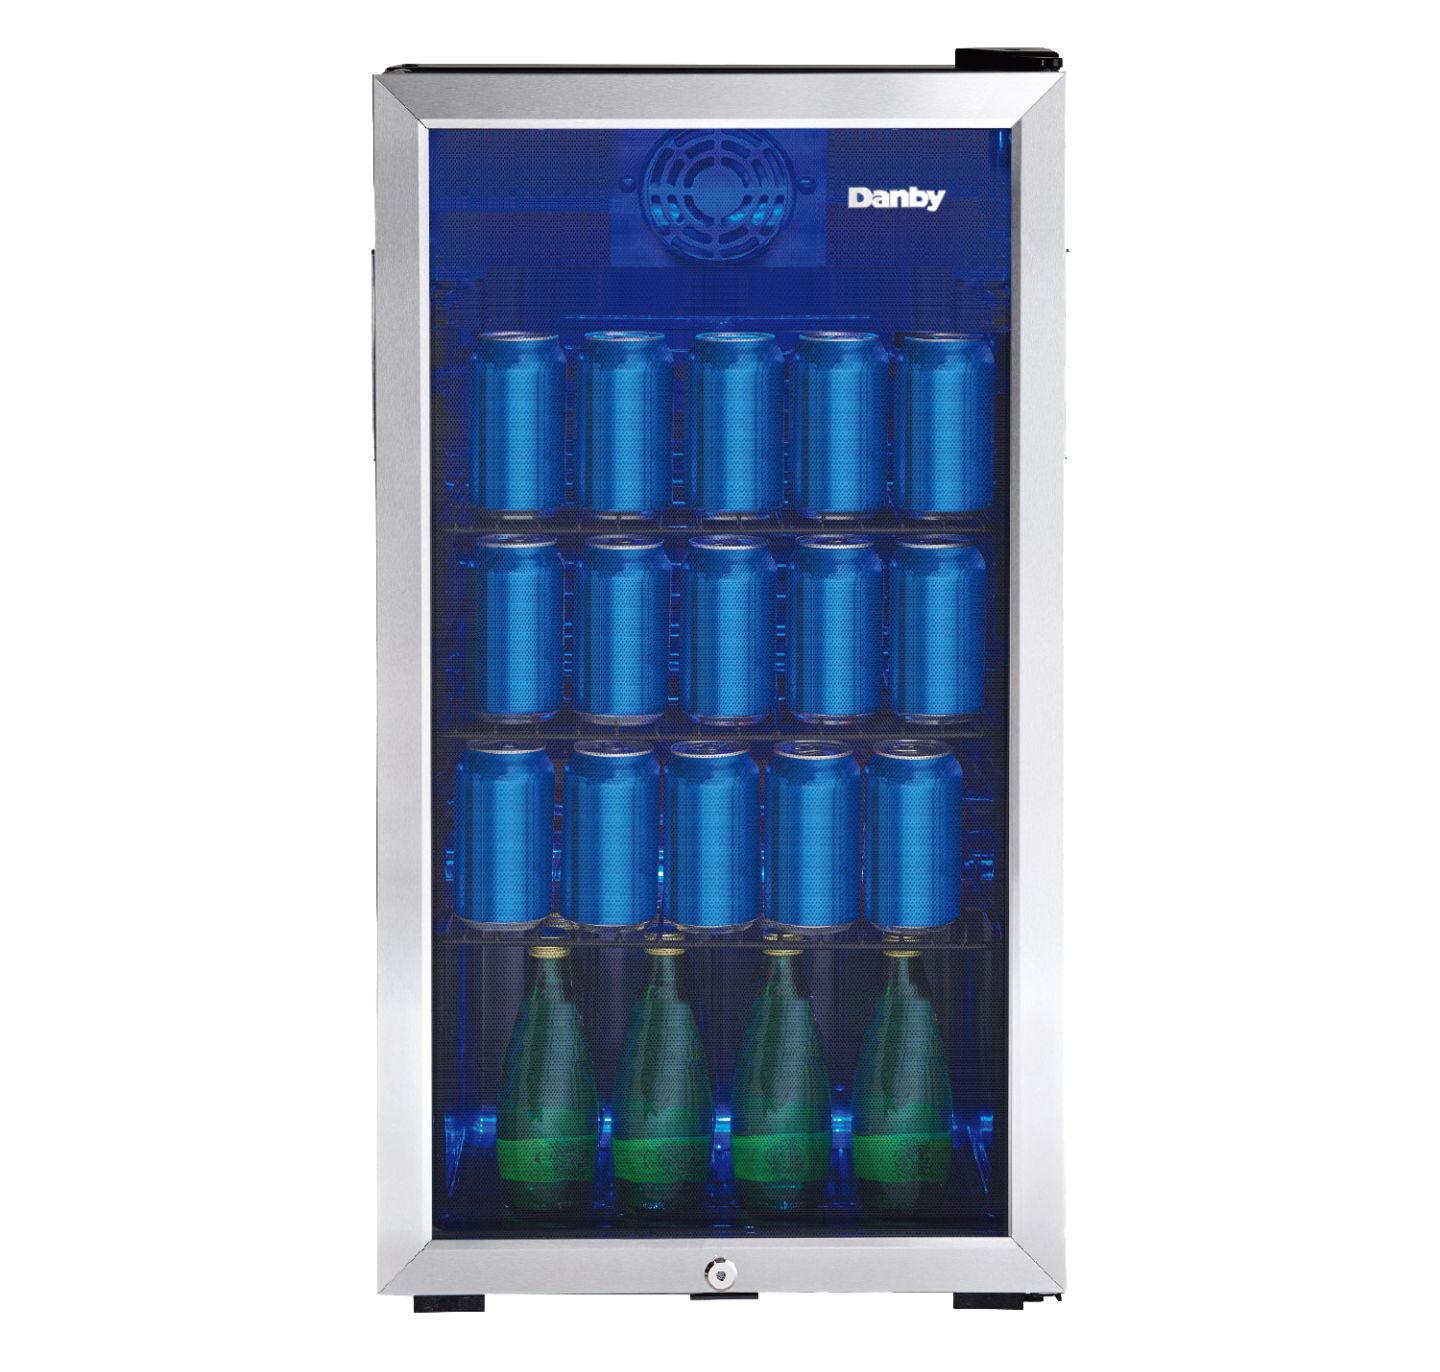 Danby 3.1 cu. ft. Free-Standing Beverage Center in Stainless Steel - DBC117A1BSSDB-6